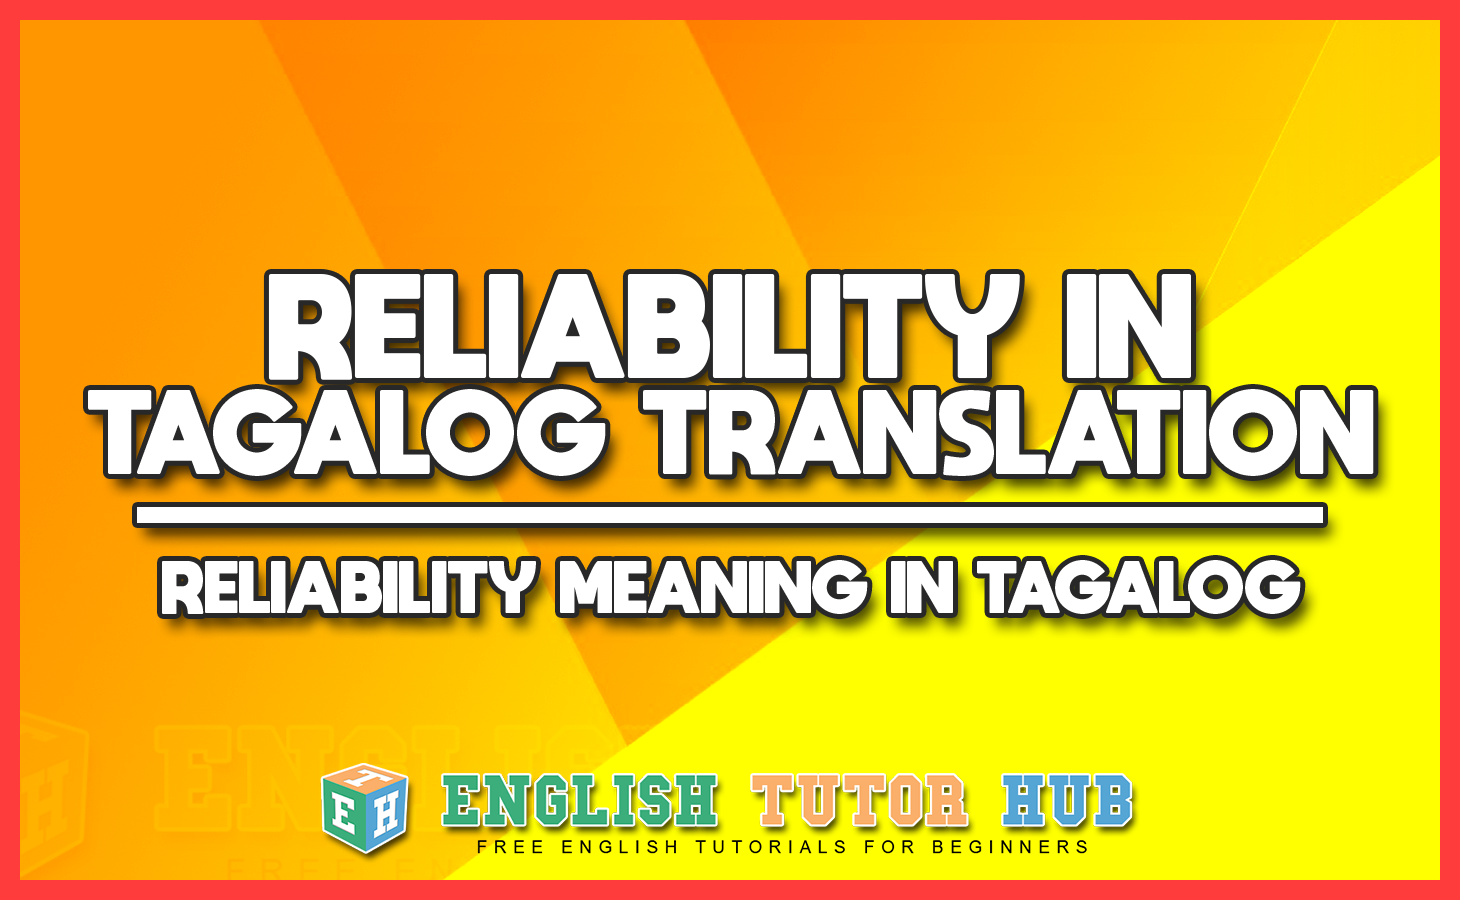 RELIABILITY IN TAGALOG TRANSLATION